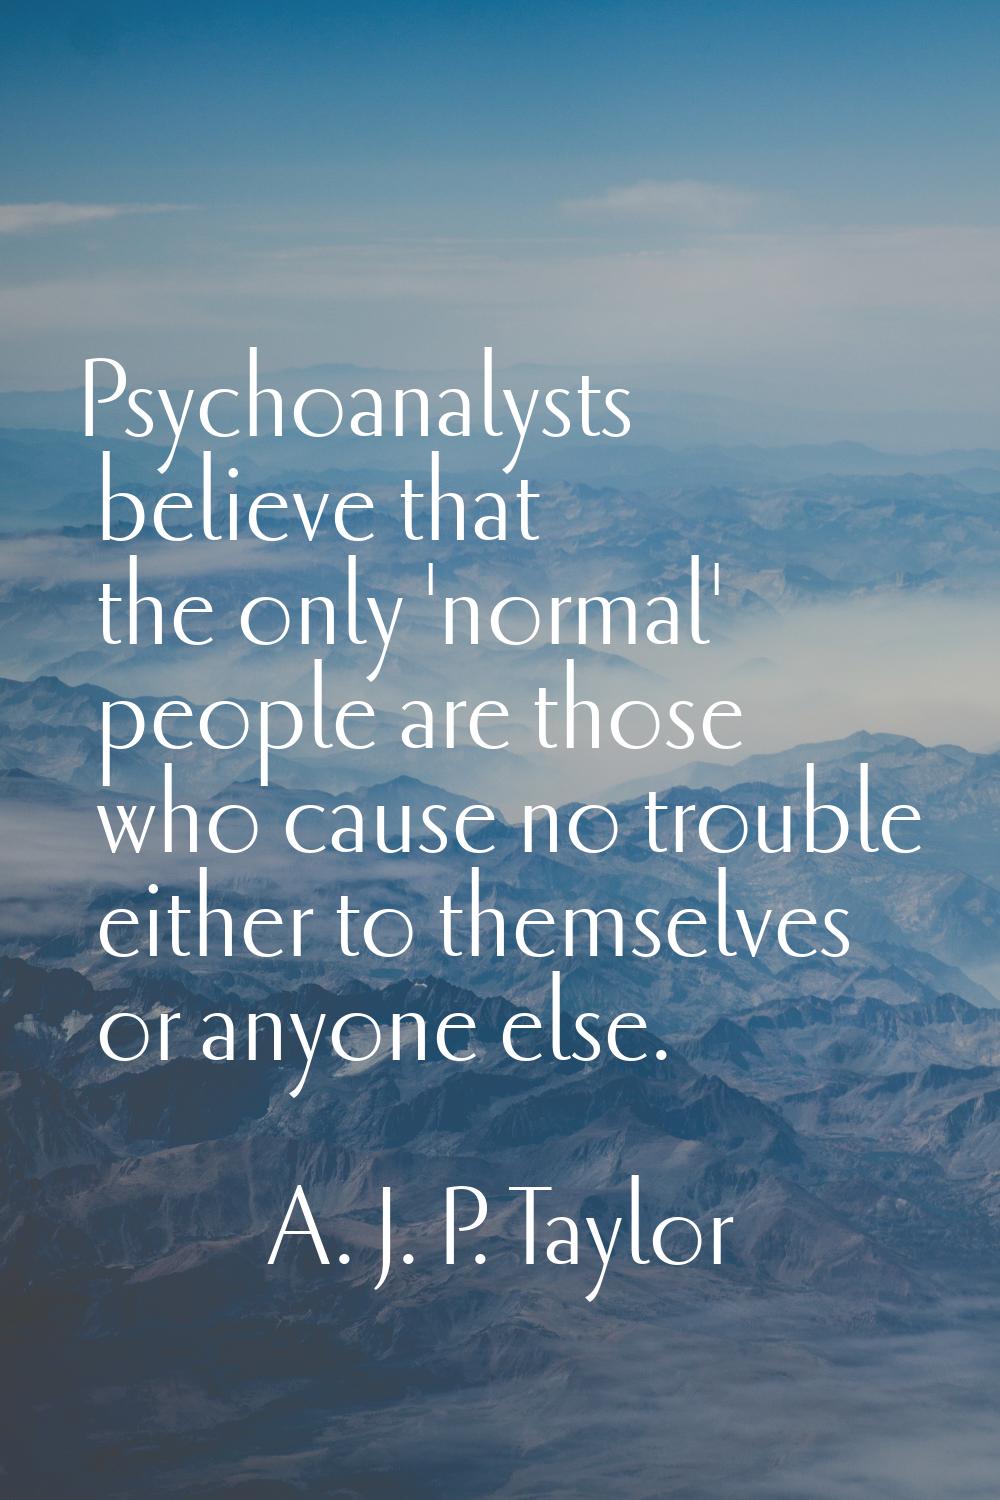 Psychoanalysts believe that the only 'normal' people are those who cause no trouble either to thems